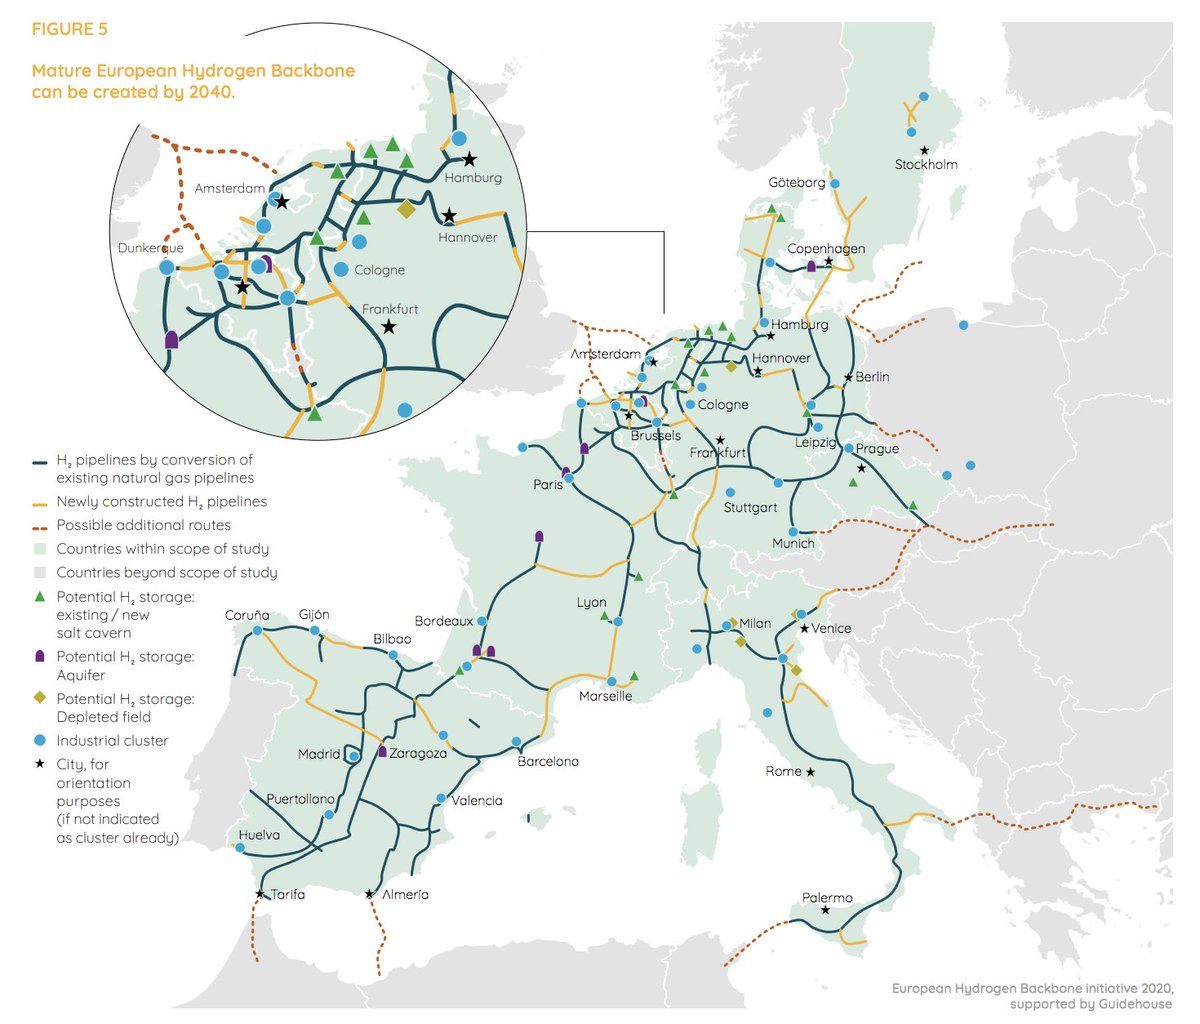 So the first takeaway is that hydrogen as an end product does not lend itself well to shipping. What about pipelines? In July a group of European TSOs came out with their suggestion of an European Hydrogen Backbone. 11/18